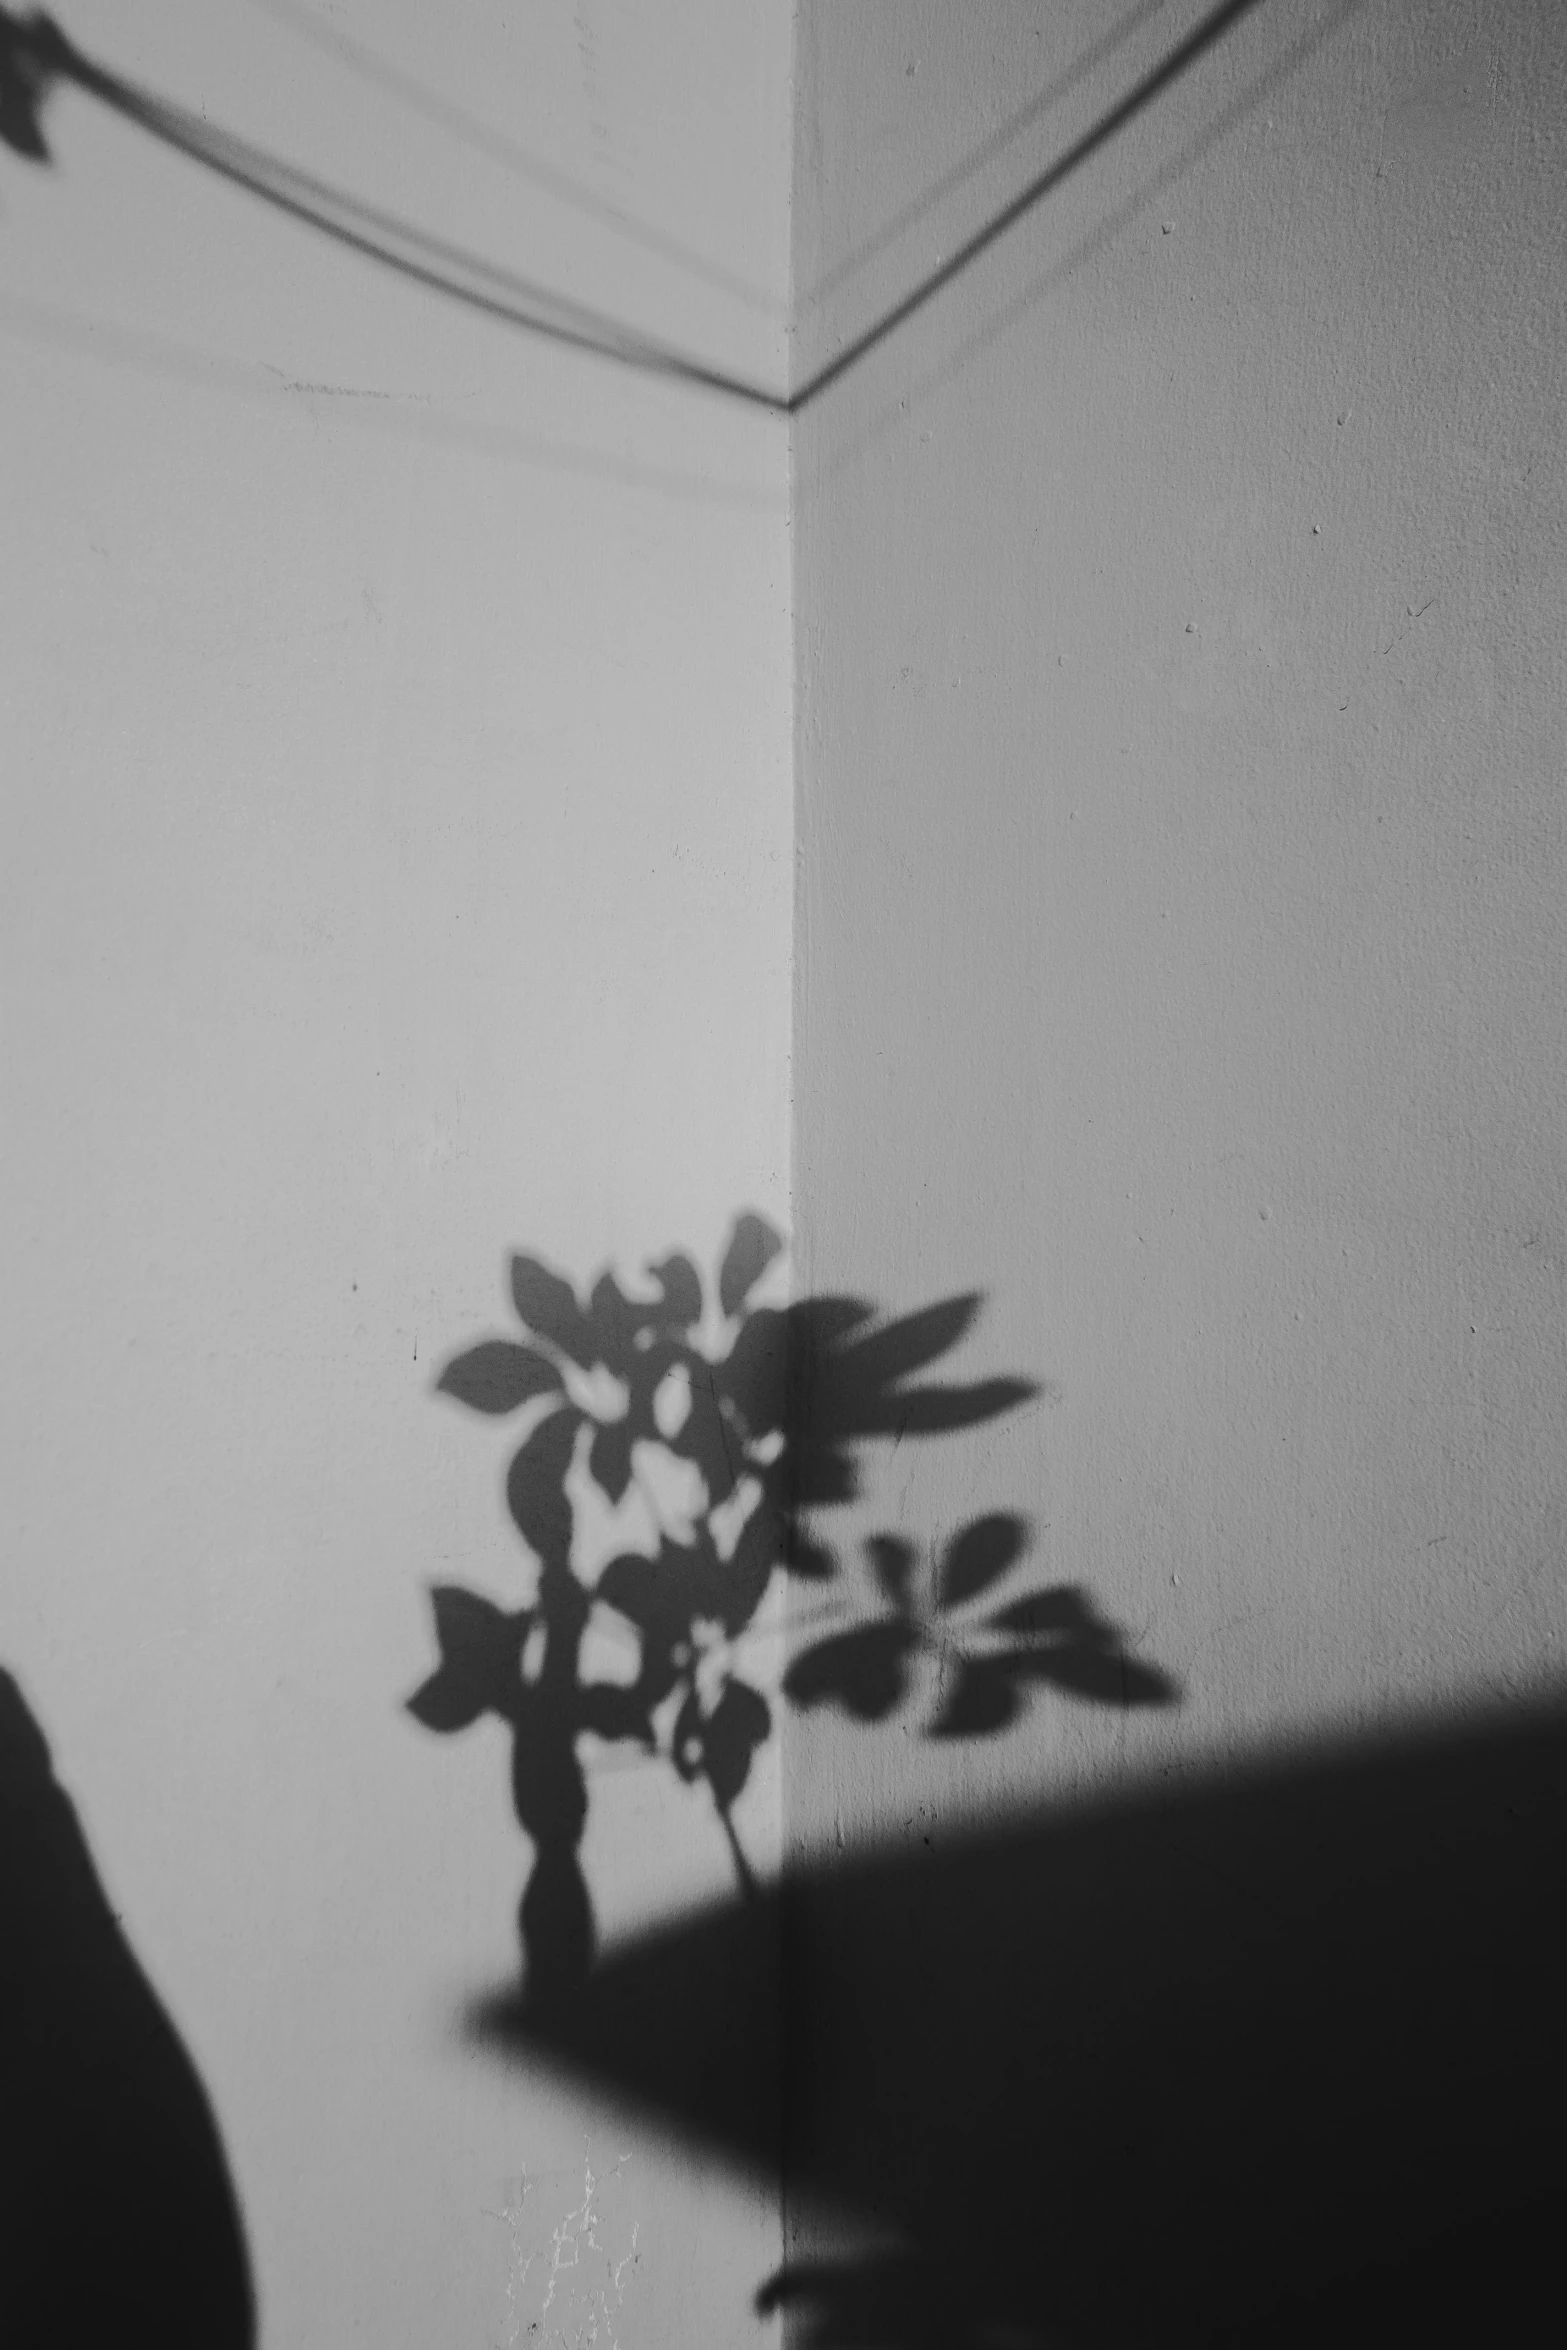 a black and white photo of a potted plant, unsplash, postminimalism, shadow polaroid photo, faces covered in shadows, looks like a tree silhouette, ✨🕌🌙